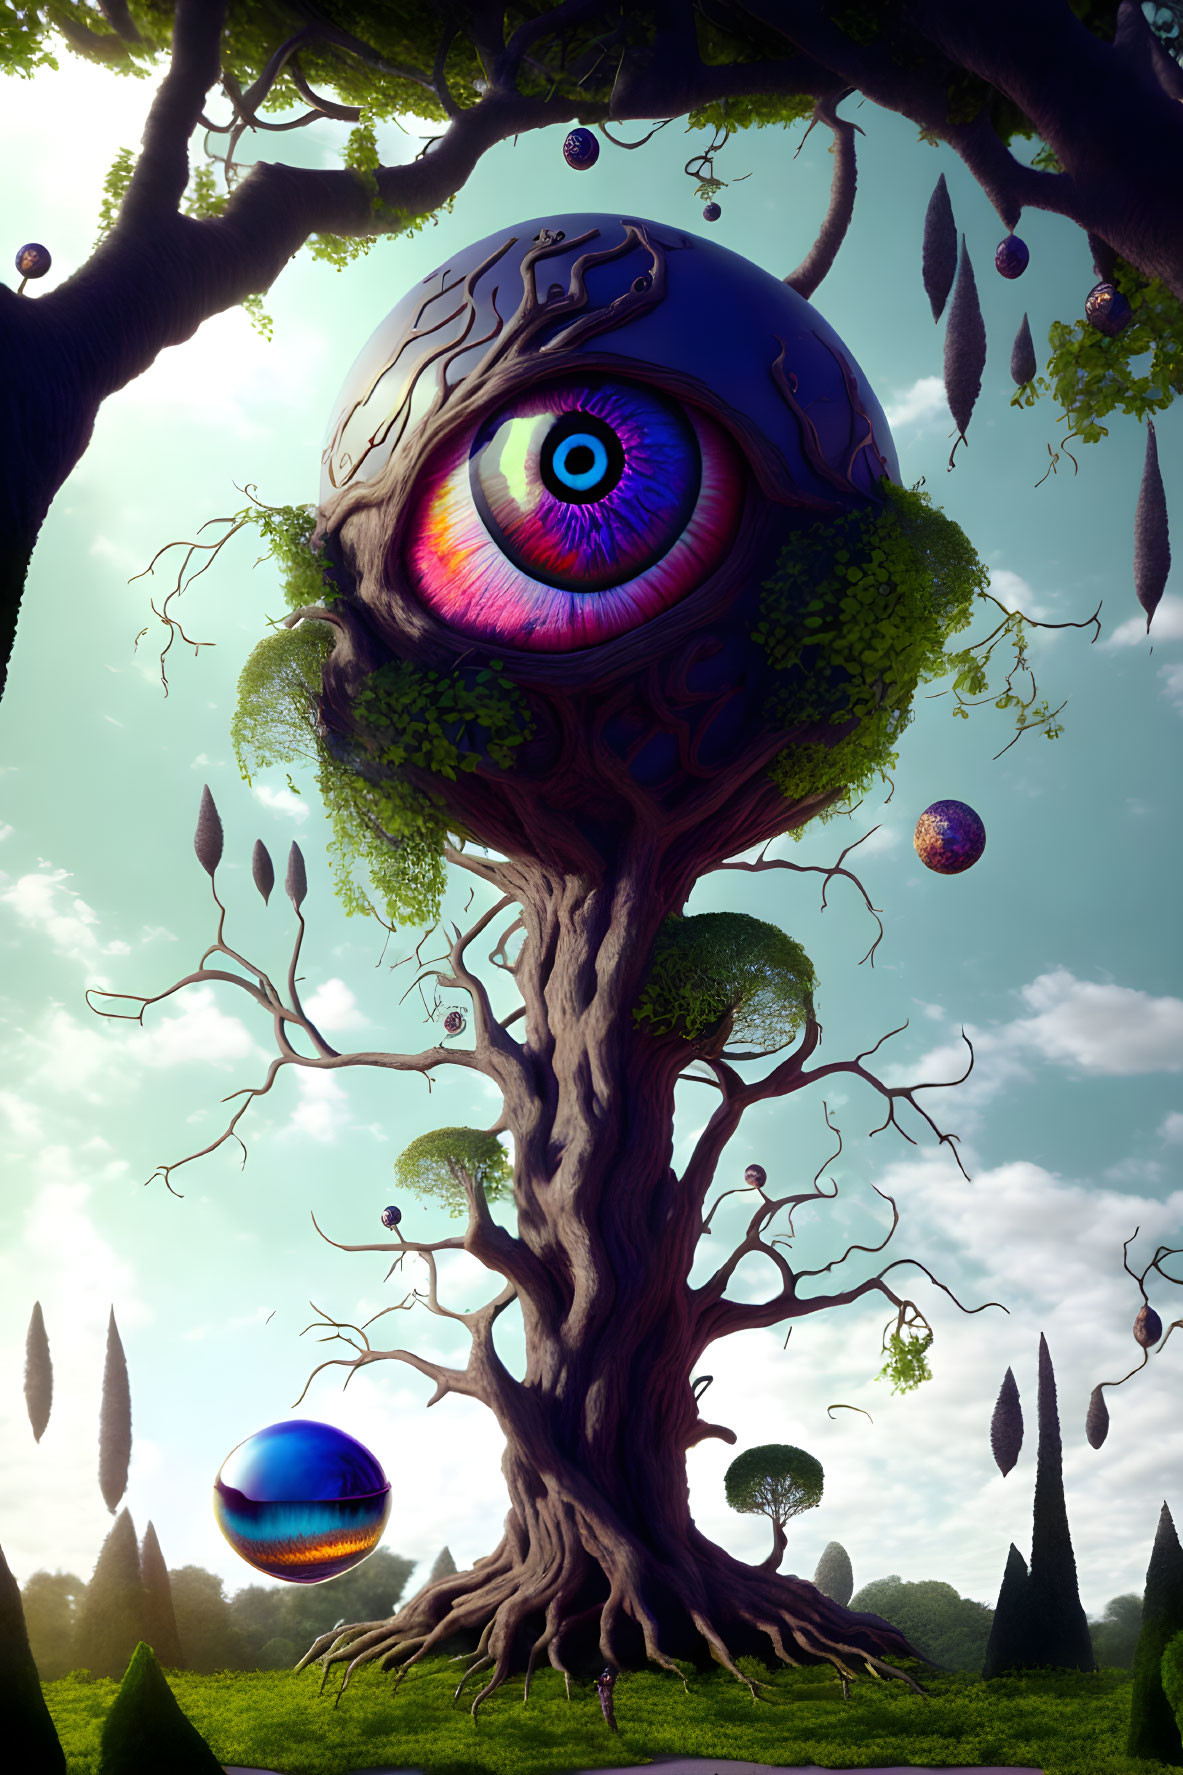 Surreal artwork: Tree with giant eye canopy in mystical landscape